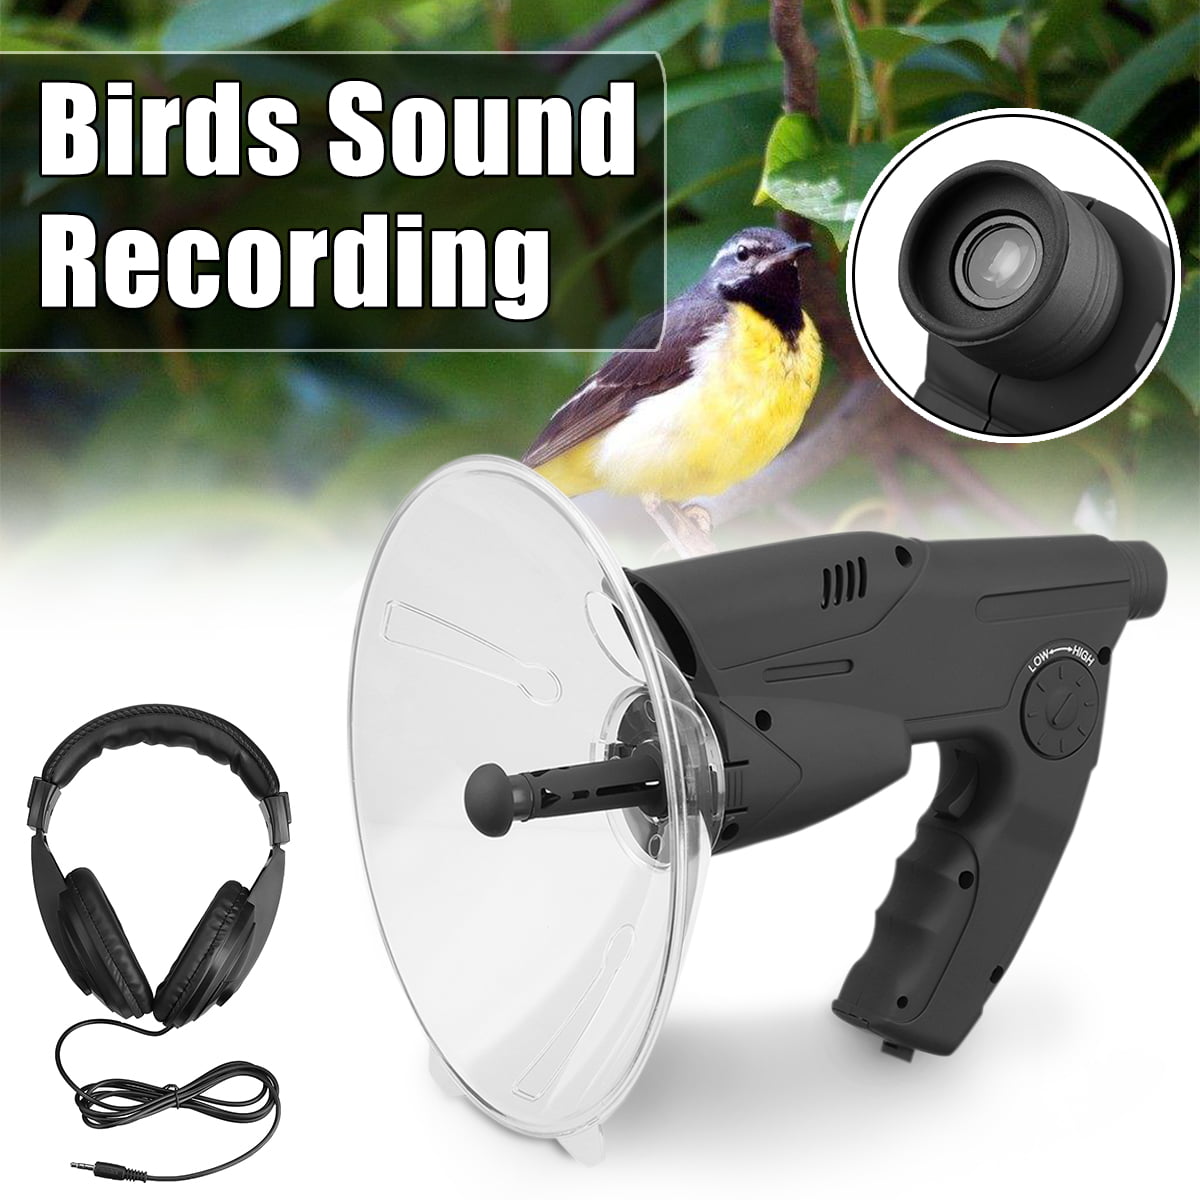 Extreme Sound Amplifier Spy Ear Listening Device Nature Observing -